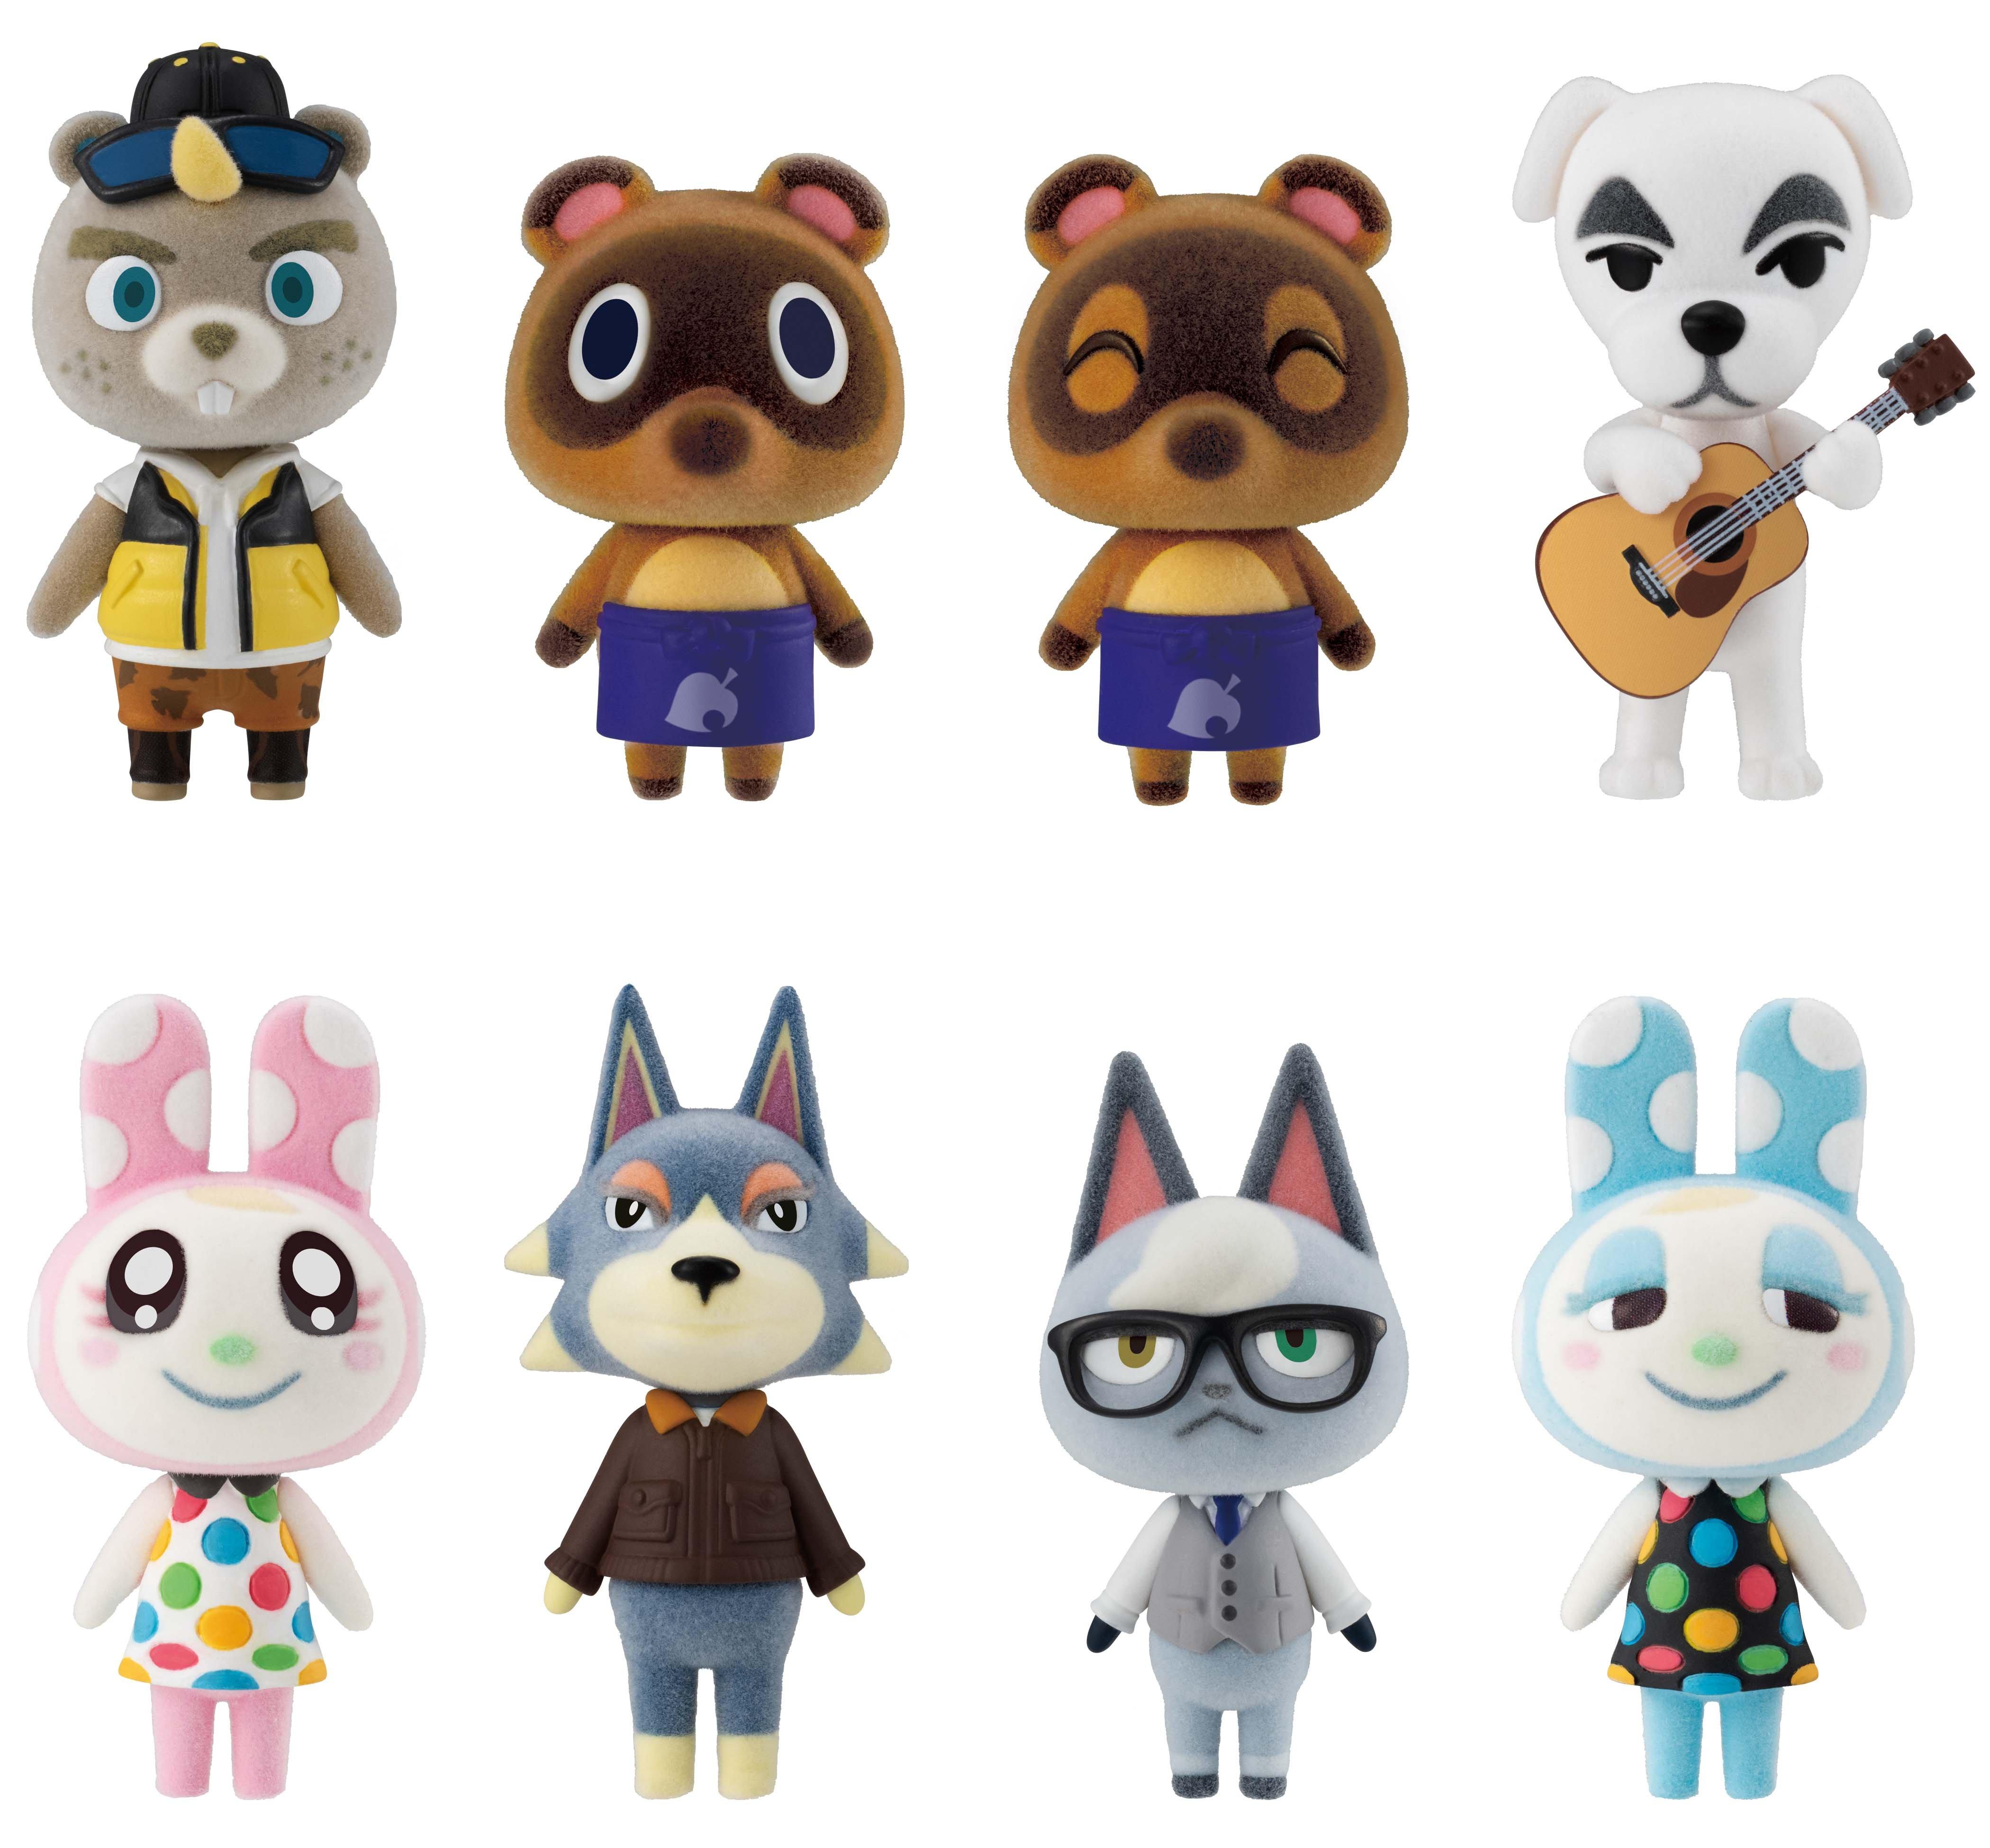 Five New Adorable Animal Crossing Villager Plushies Are Coming